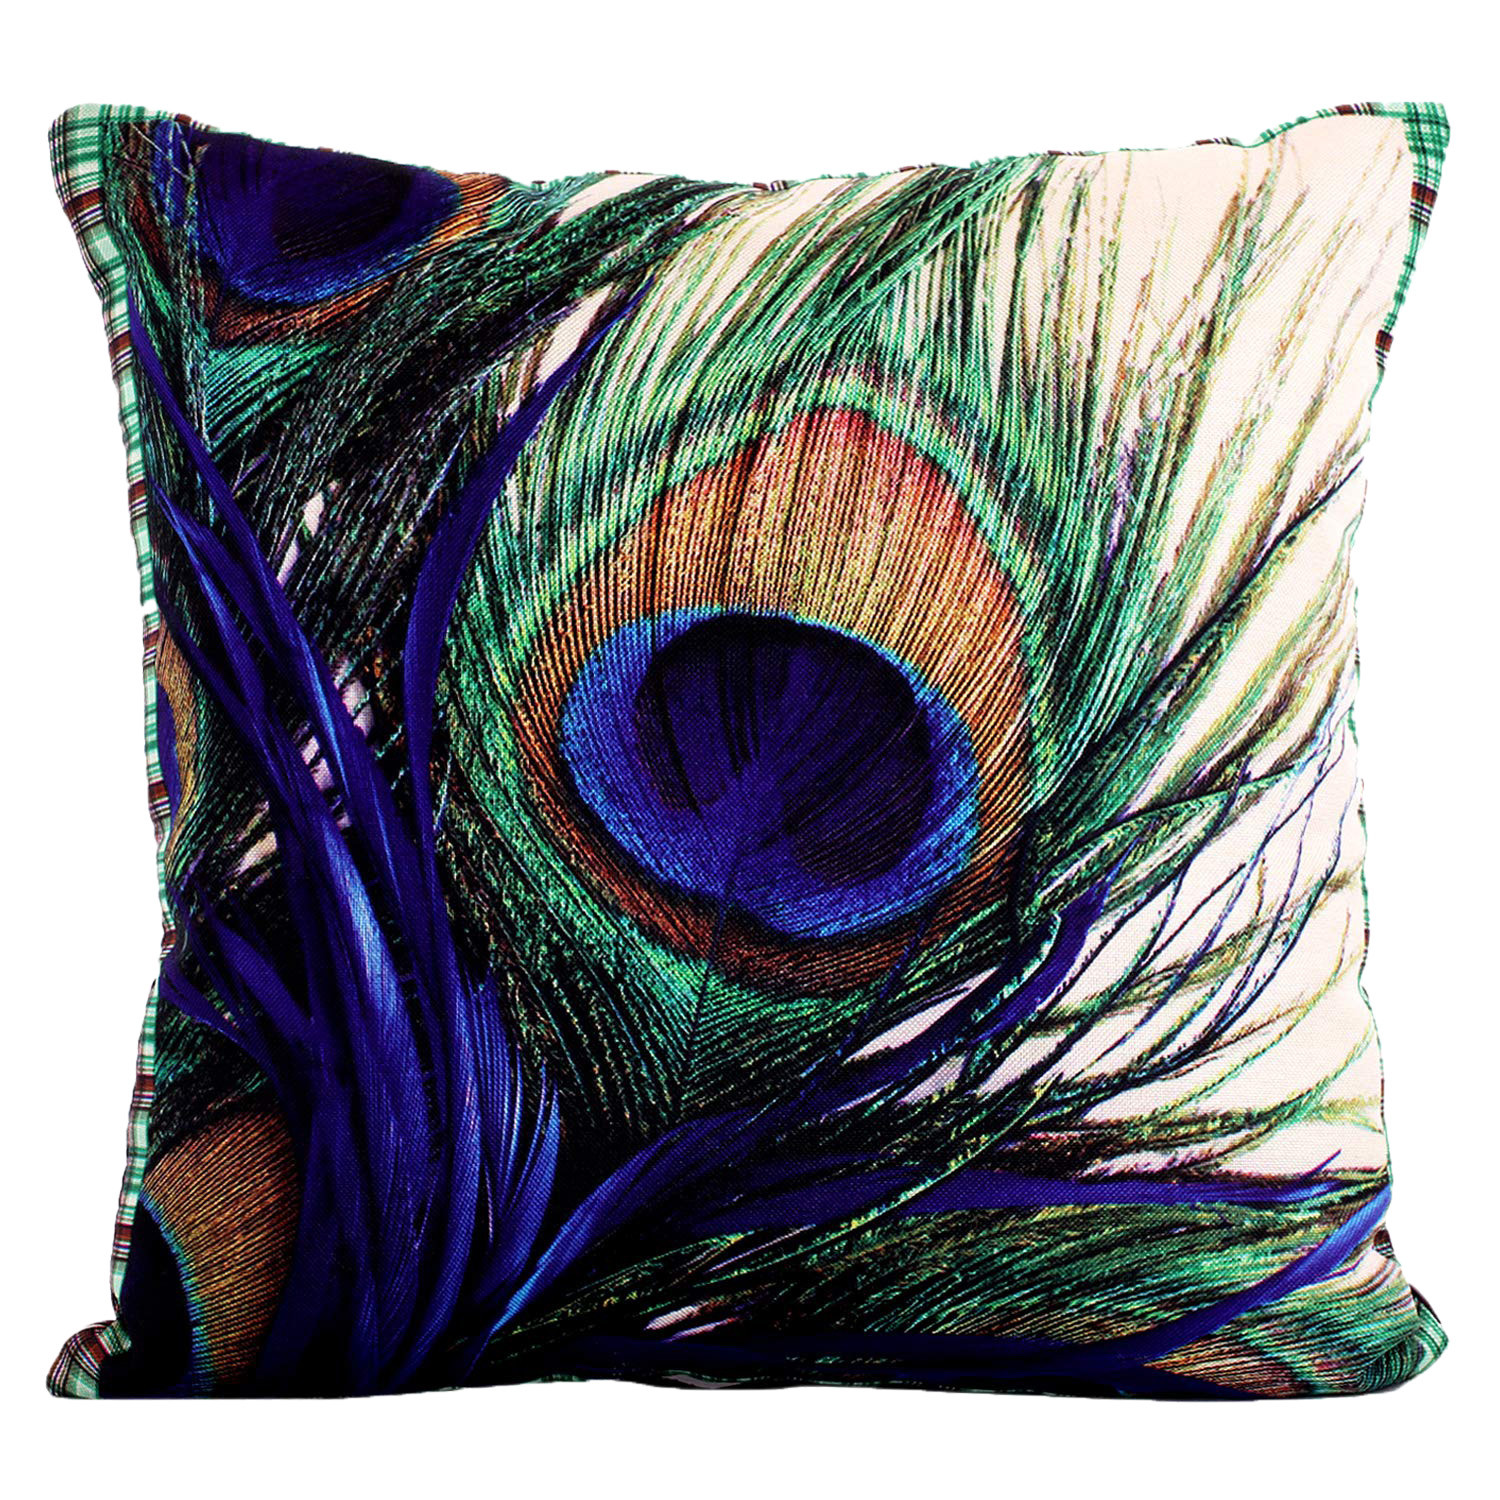 Kuber Industries Cushion Cover|Ractangle Cushion Covers|Sofa Cushion Covers|Cushion Covers 16 inch x 16 inch|Cushion Cover Set of 5|MULTICOLOR